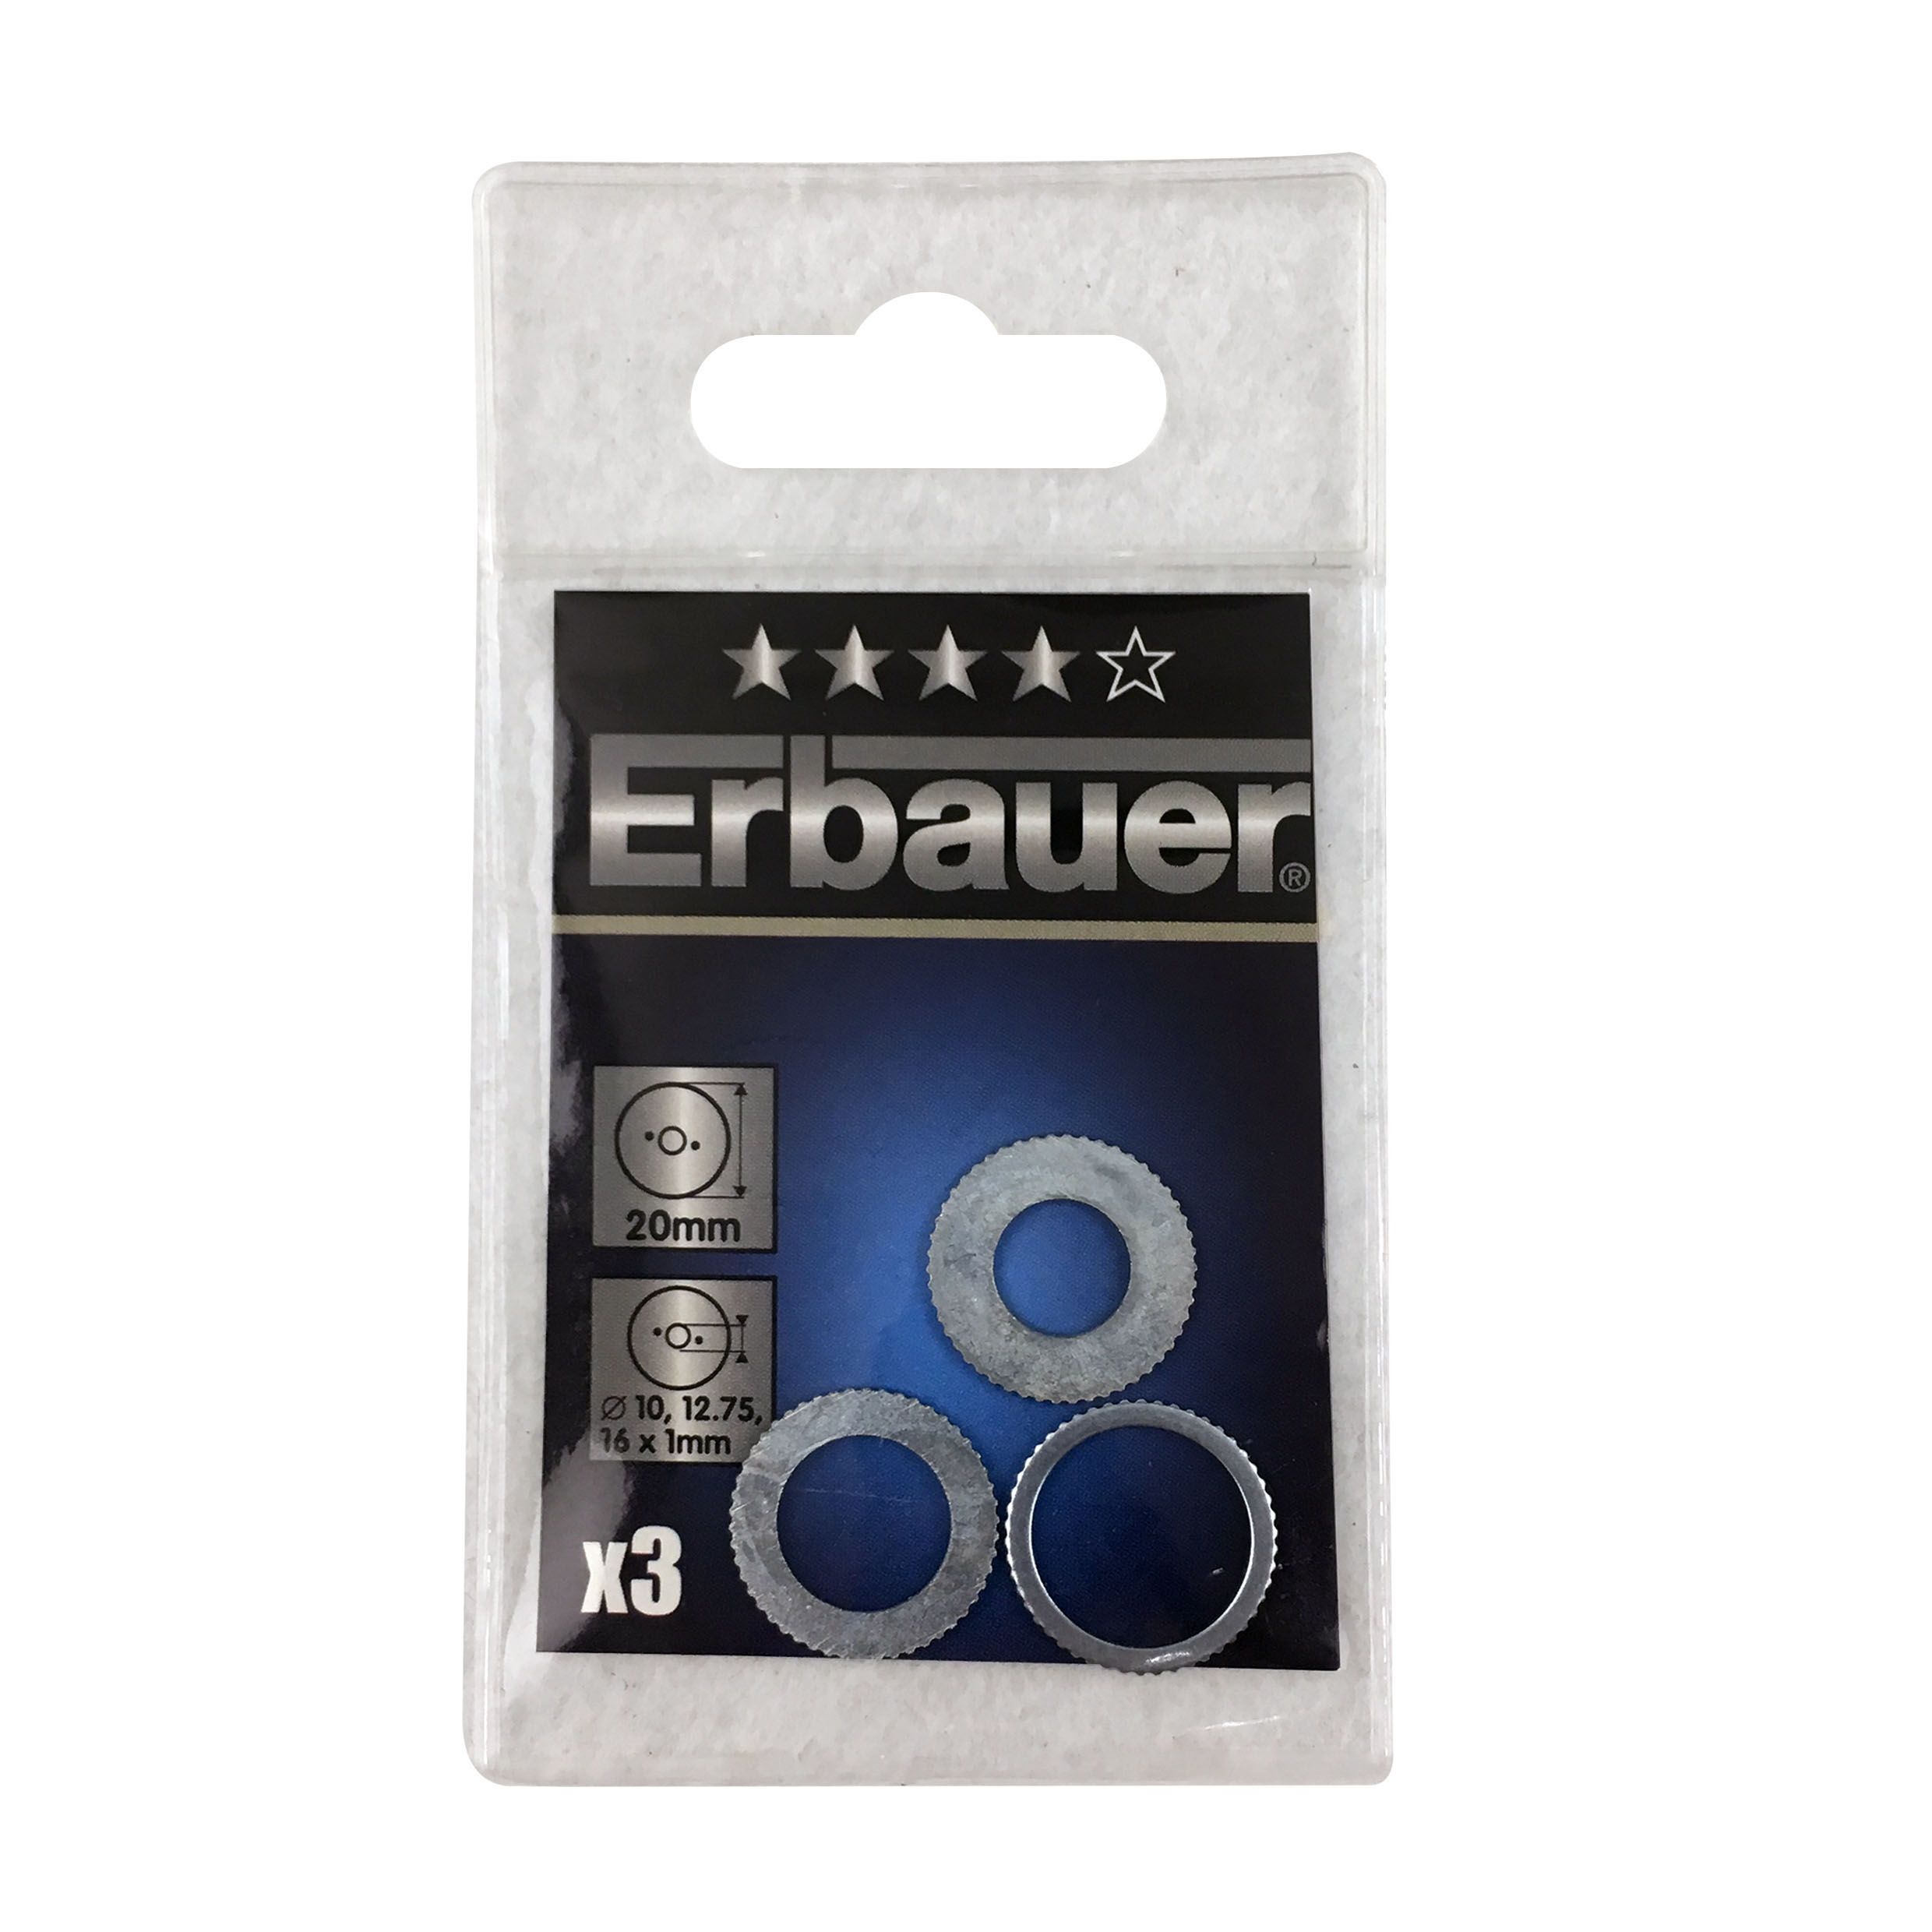 Erbauer 20mm Disc bore reduction rings, Set of 3